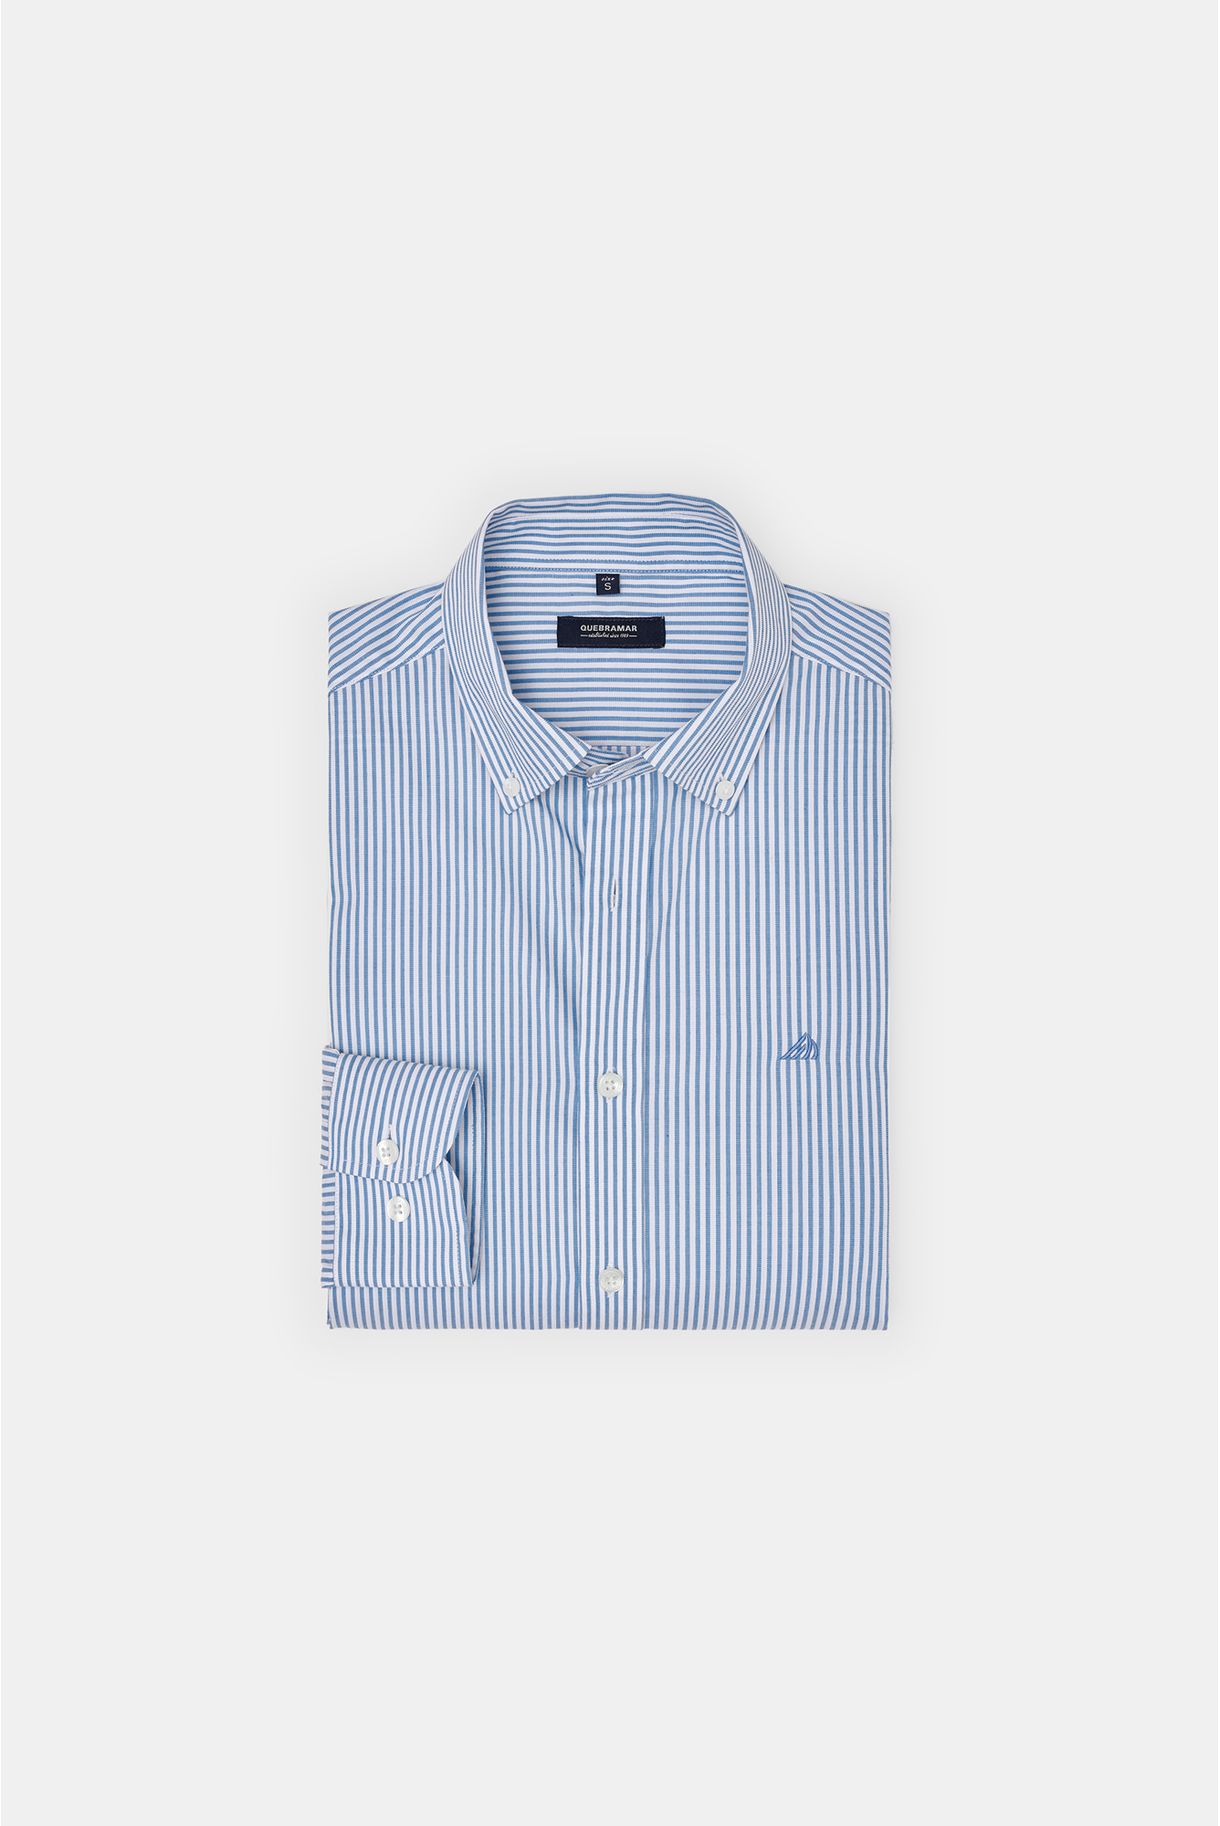 Men's shirt with stripes